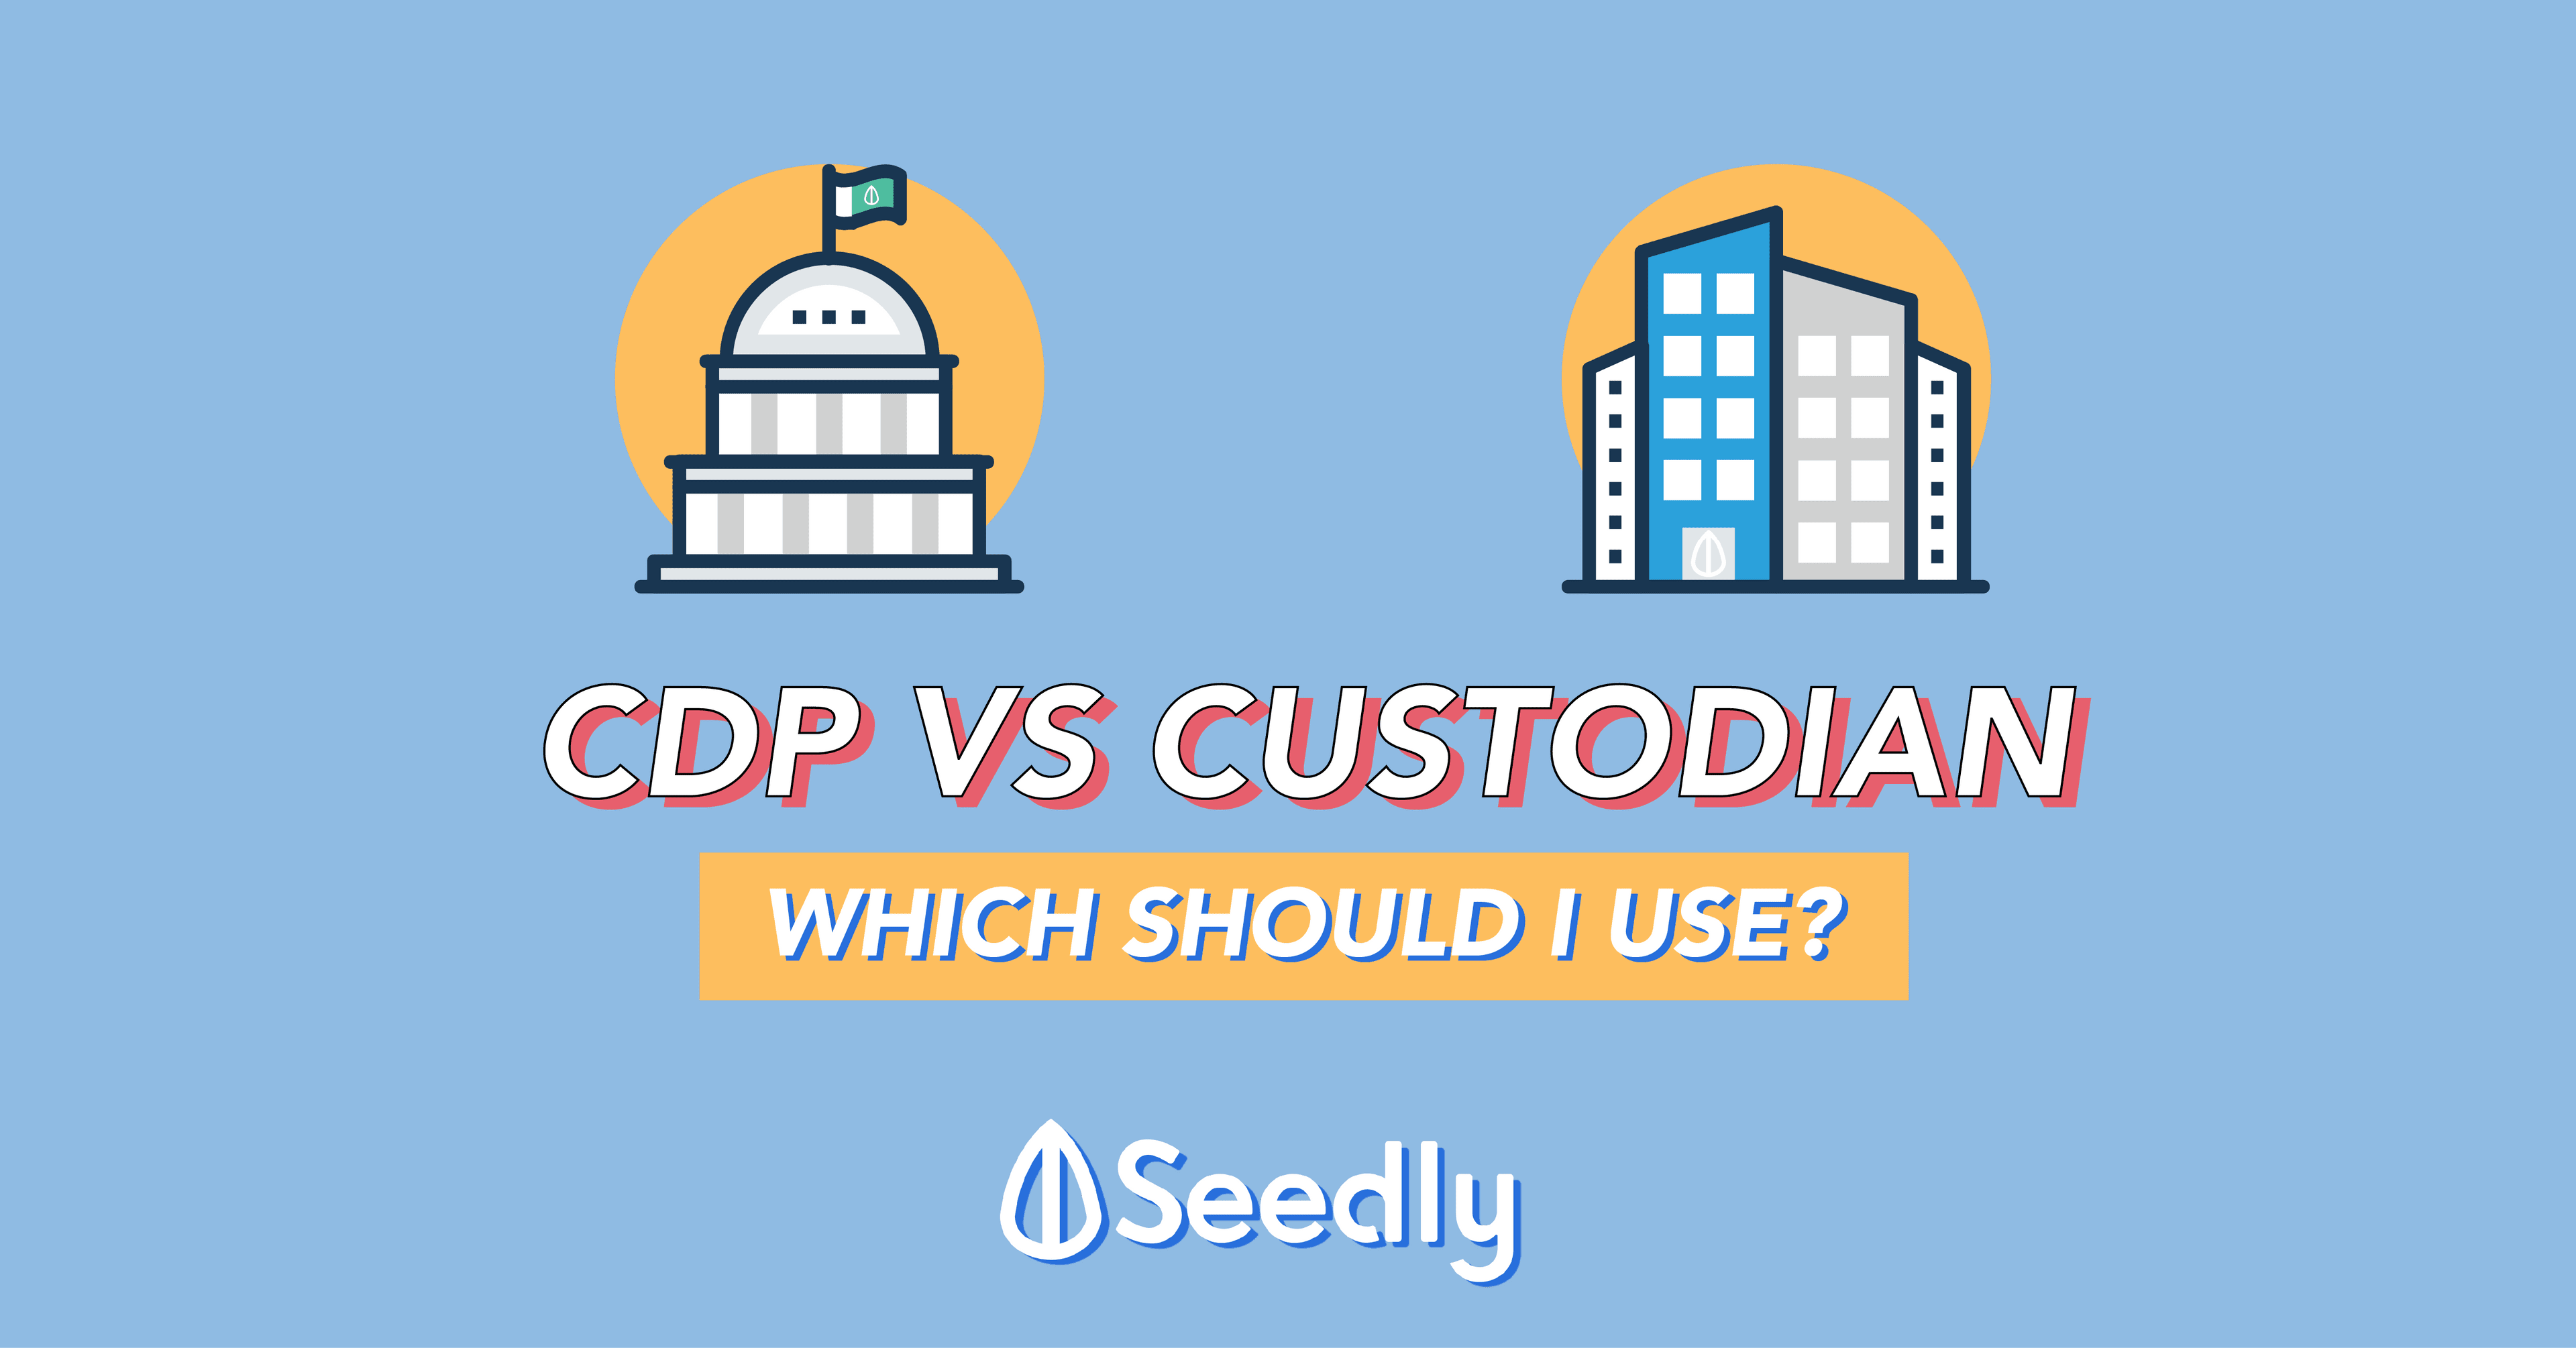 cdp vs custodian account which should i use?